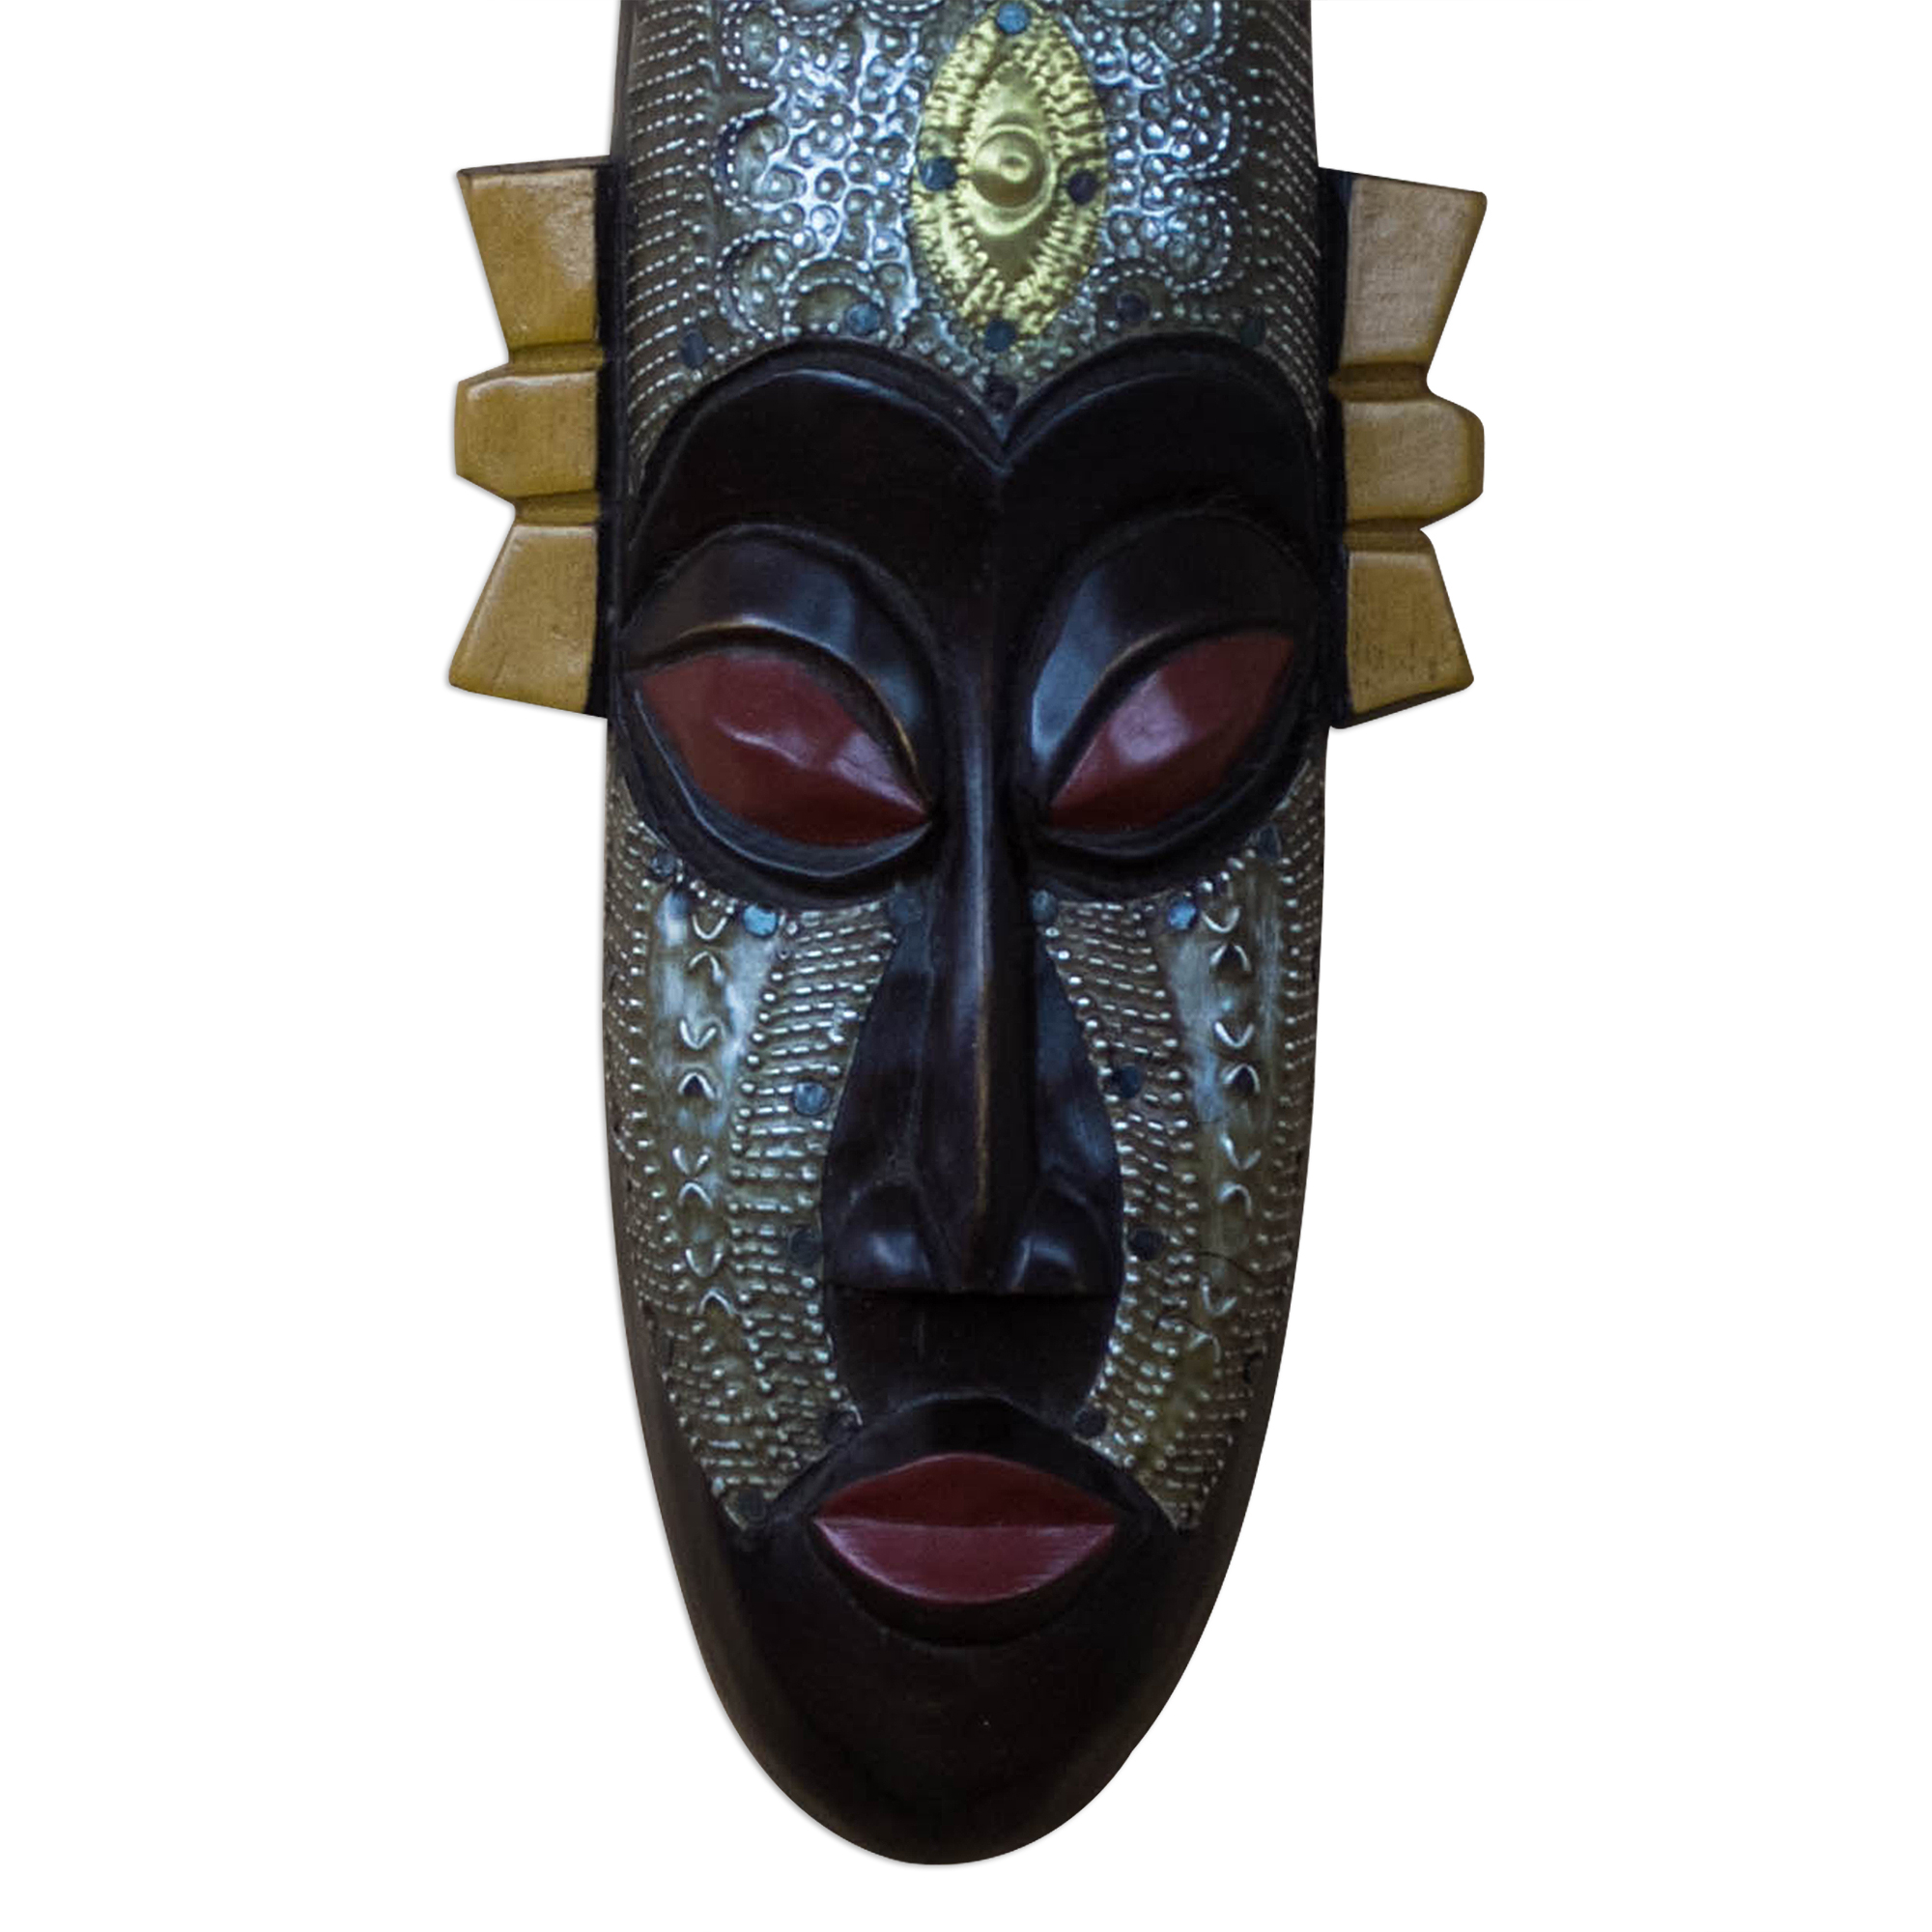 Artisan Crafted African Sese Wood Mask From Ghana Noble Queen Novica 9340